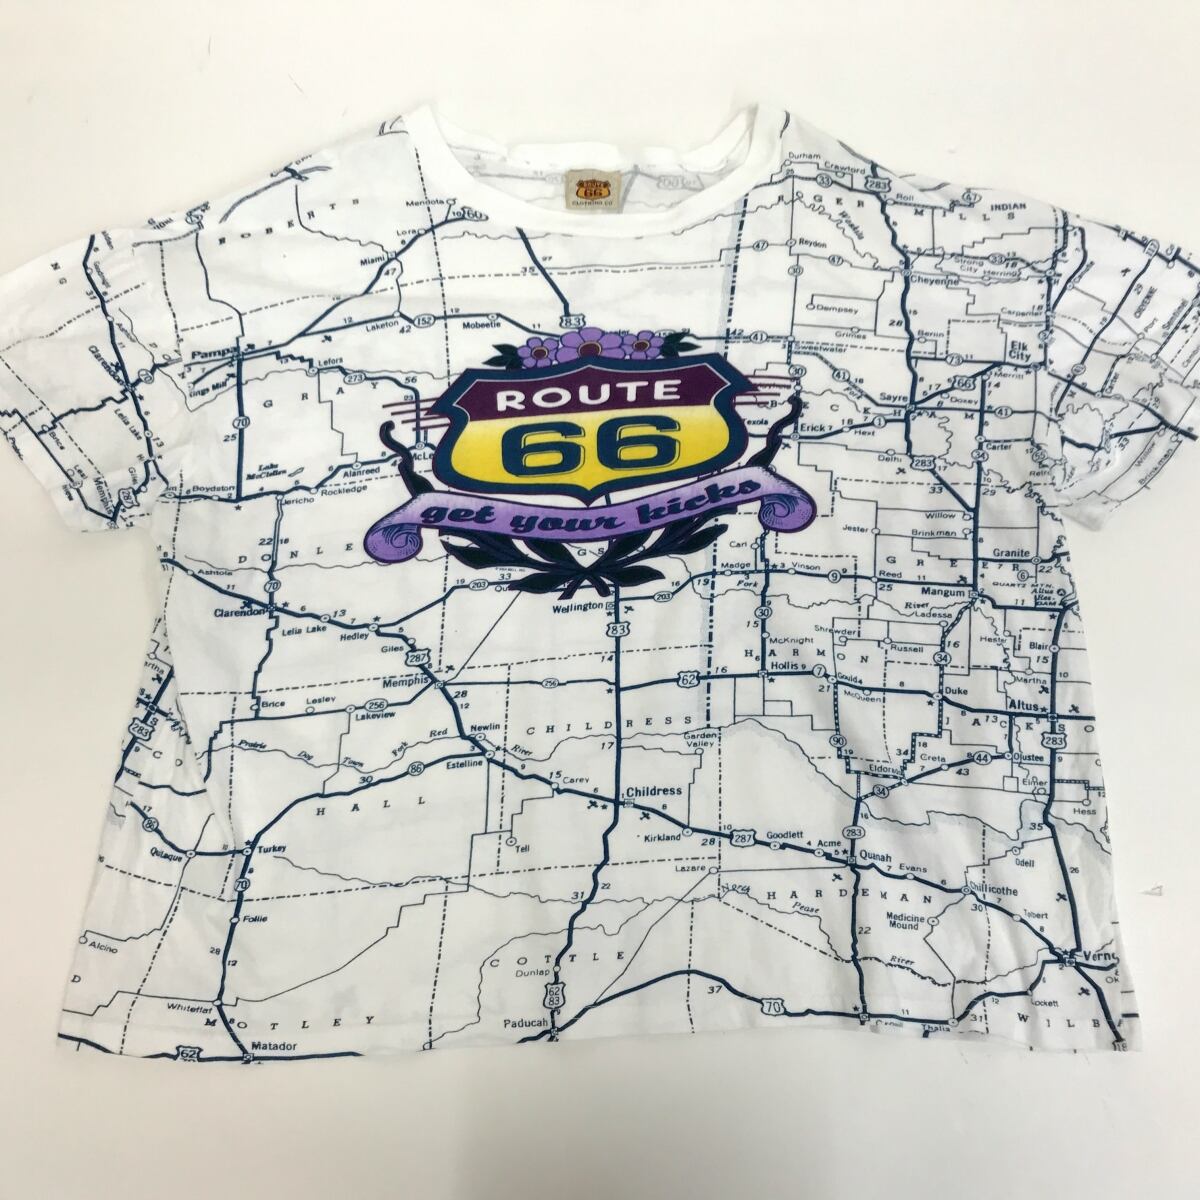 ROUTE 66 CLOTHING 80's 90's スタイル マップ総柄 全柄 Tシャツ ...